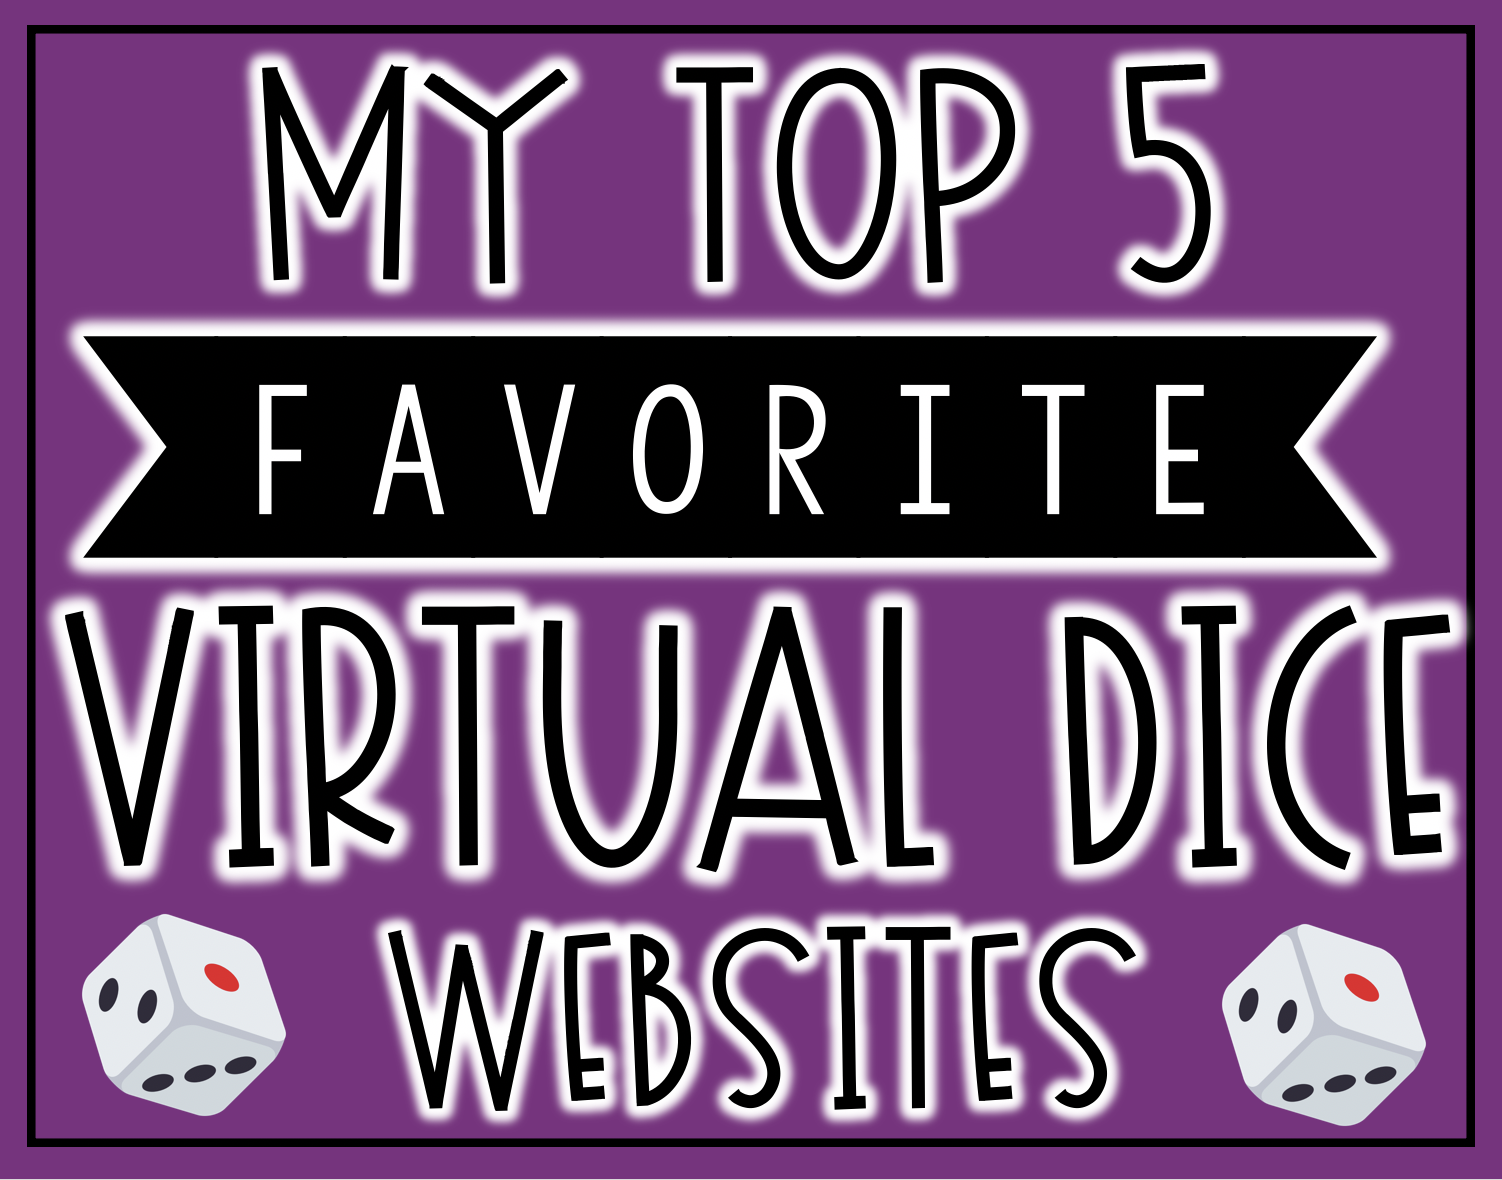 My Top 5 Favorite Virtual Dice Websites that can be used on most devices like Chromebooks, computers, laptops, iPads and phones. Kid friendly and great for classroom use!